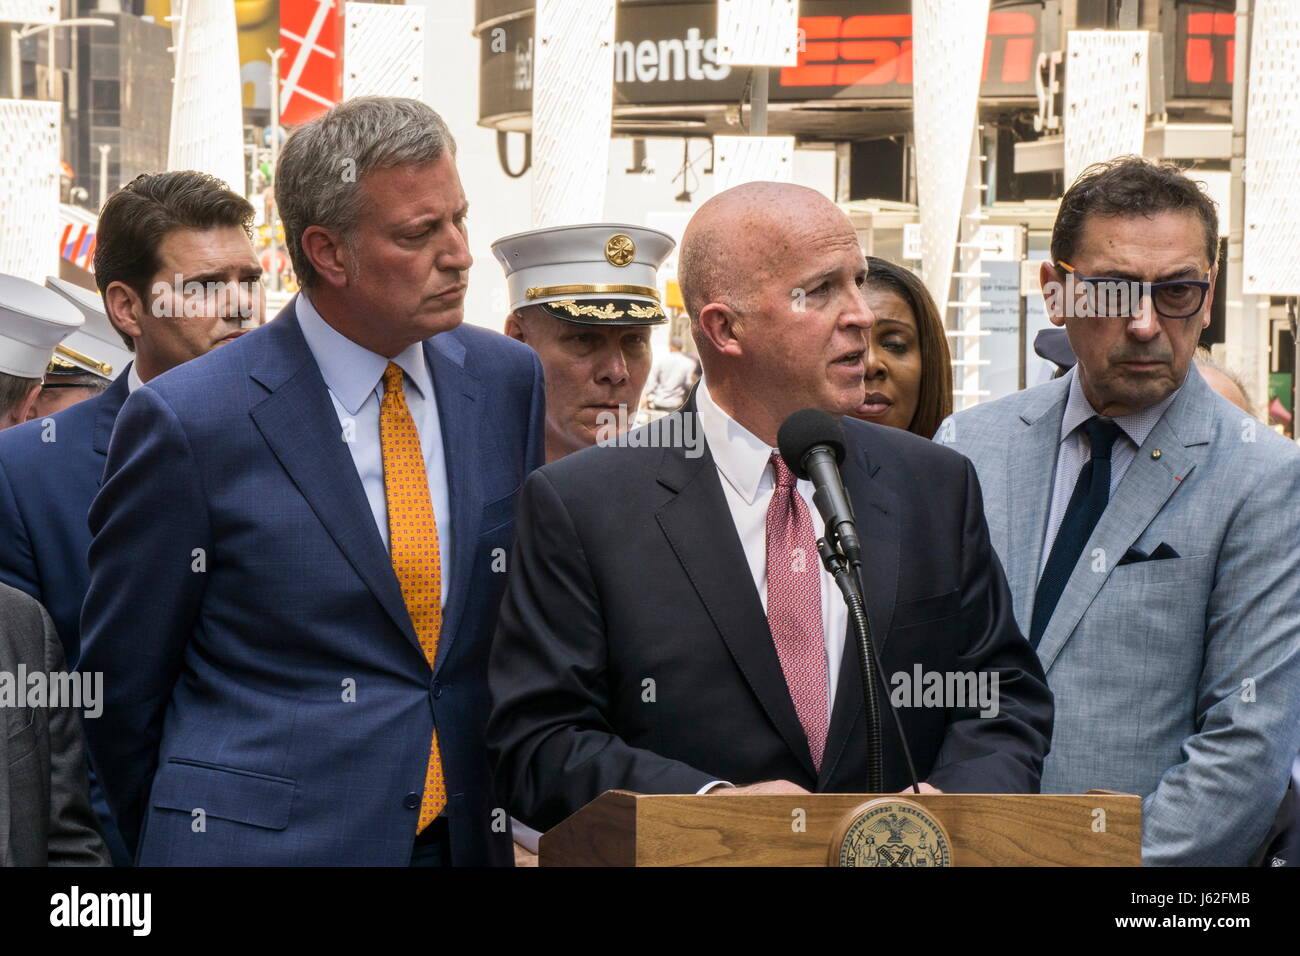 New York, New York, USA. 18th May, 2017. New York City Mayor BILL DEBLASIO (L), New York Police Commissioner James O'Neil (C) and other public officials gather in Times Square after one pedestrian was killed, from Michigan, and 22 others were struck by a vehicle in Times Square. Credit: Kevin C. Downs/ZUMA Wire/ZUMAPRESS.com/Alamy Live News Stock Photo